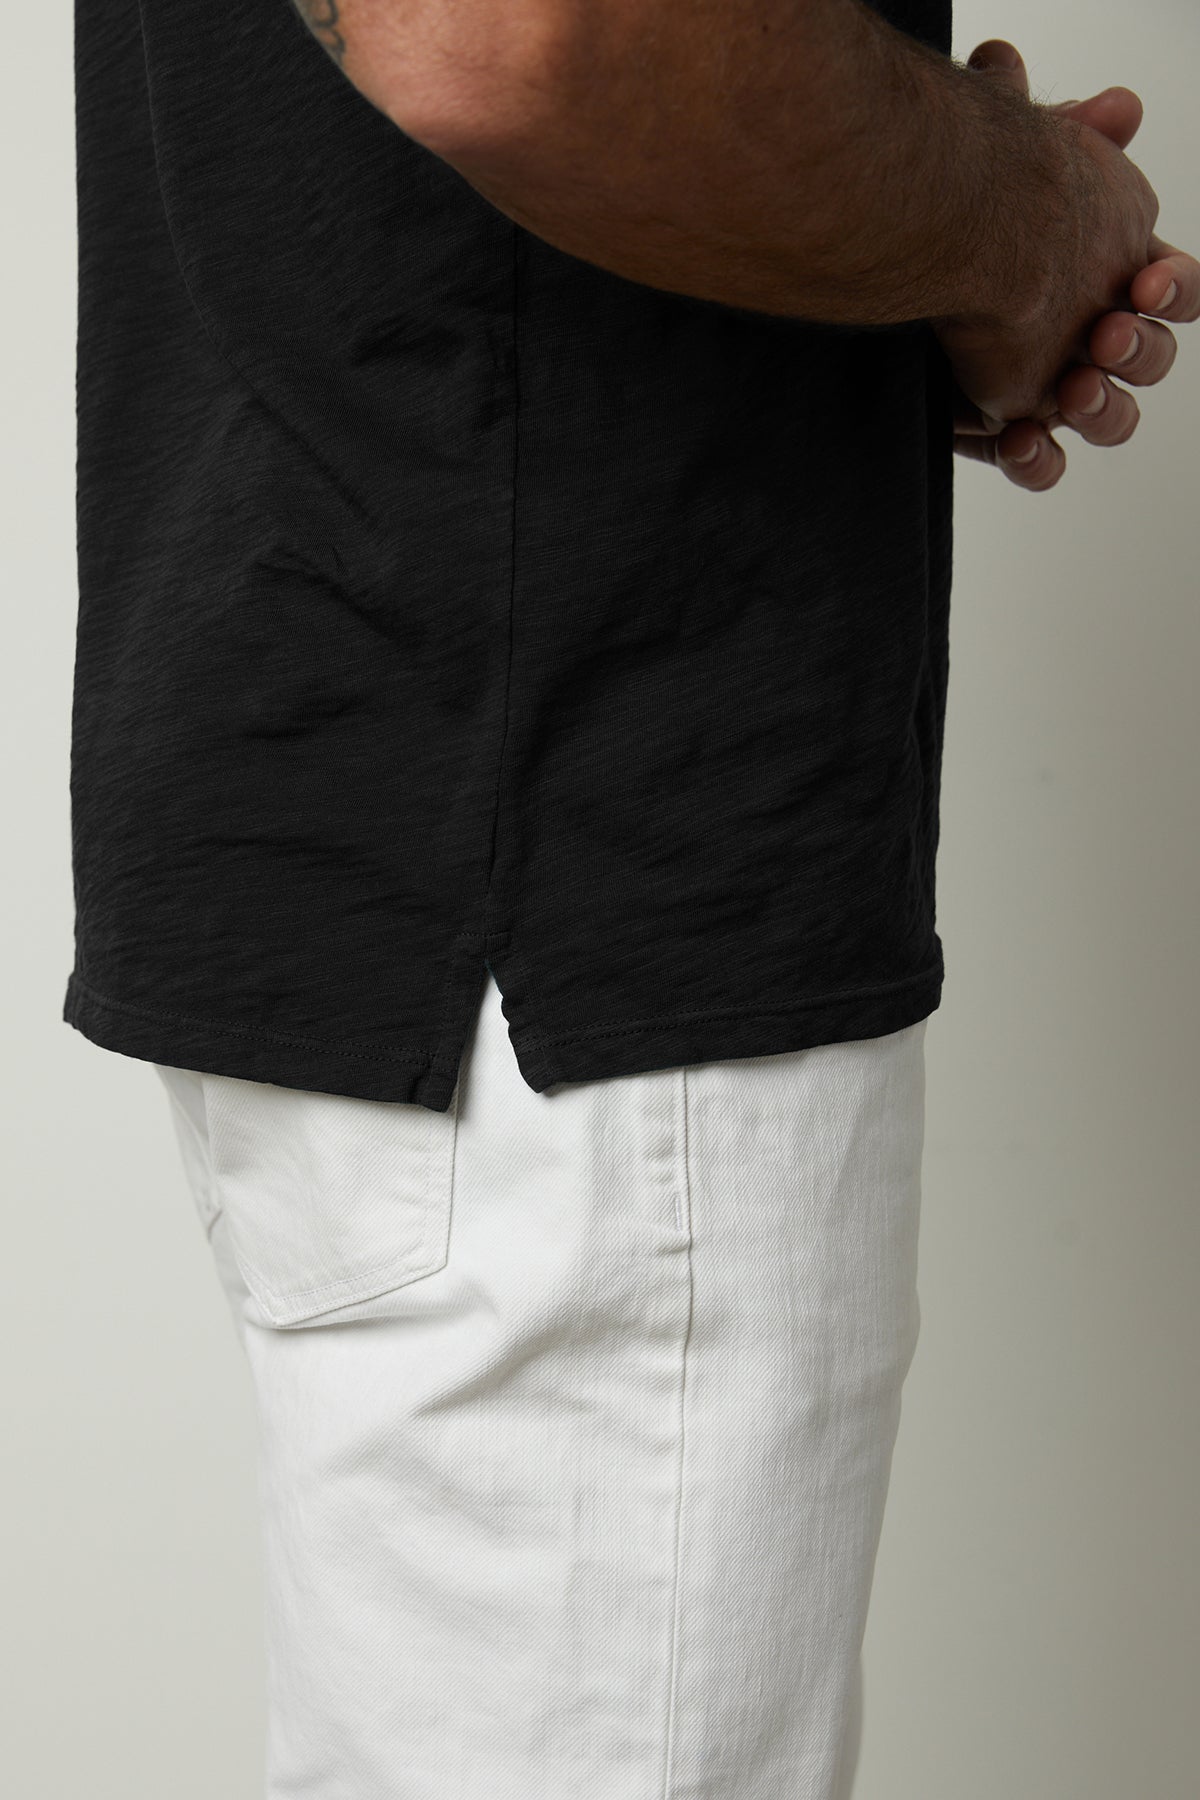   Niko Polo in black collared short sleeve shirt with white pants side split hem view 